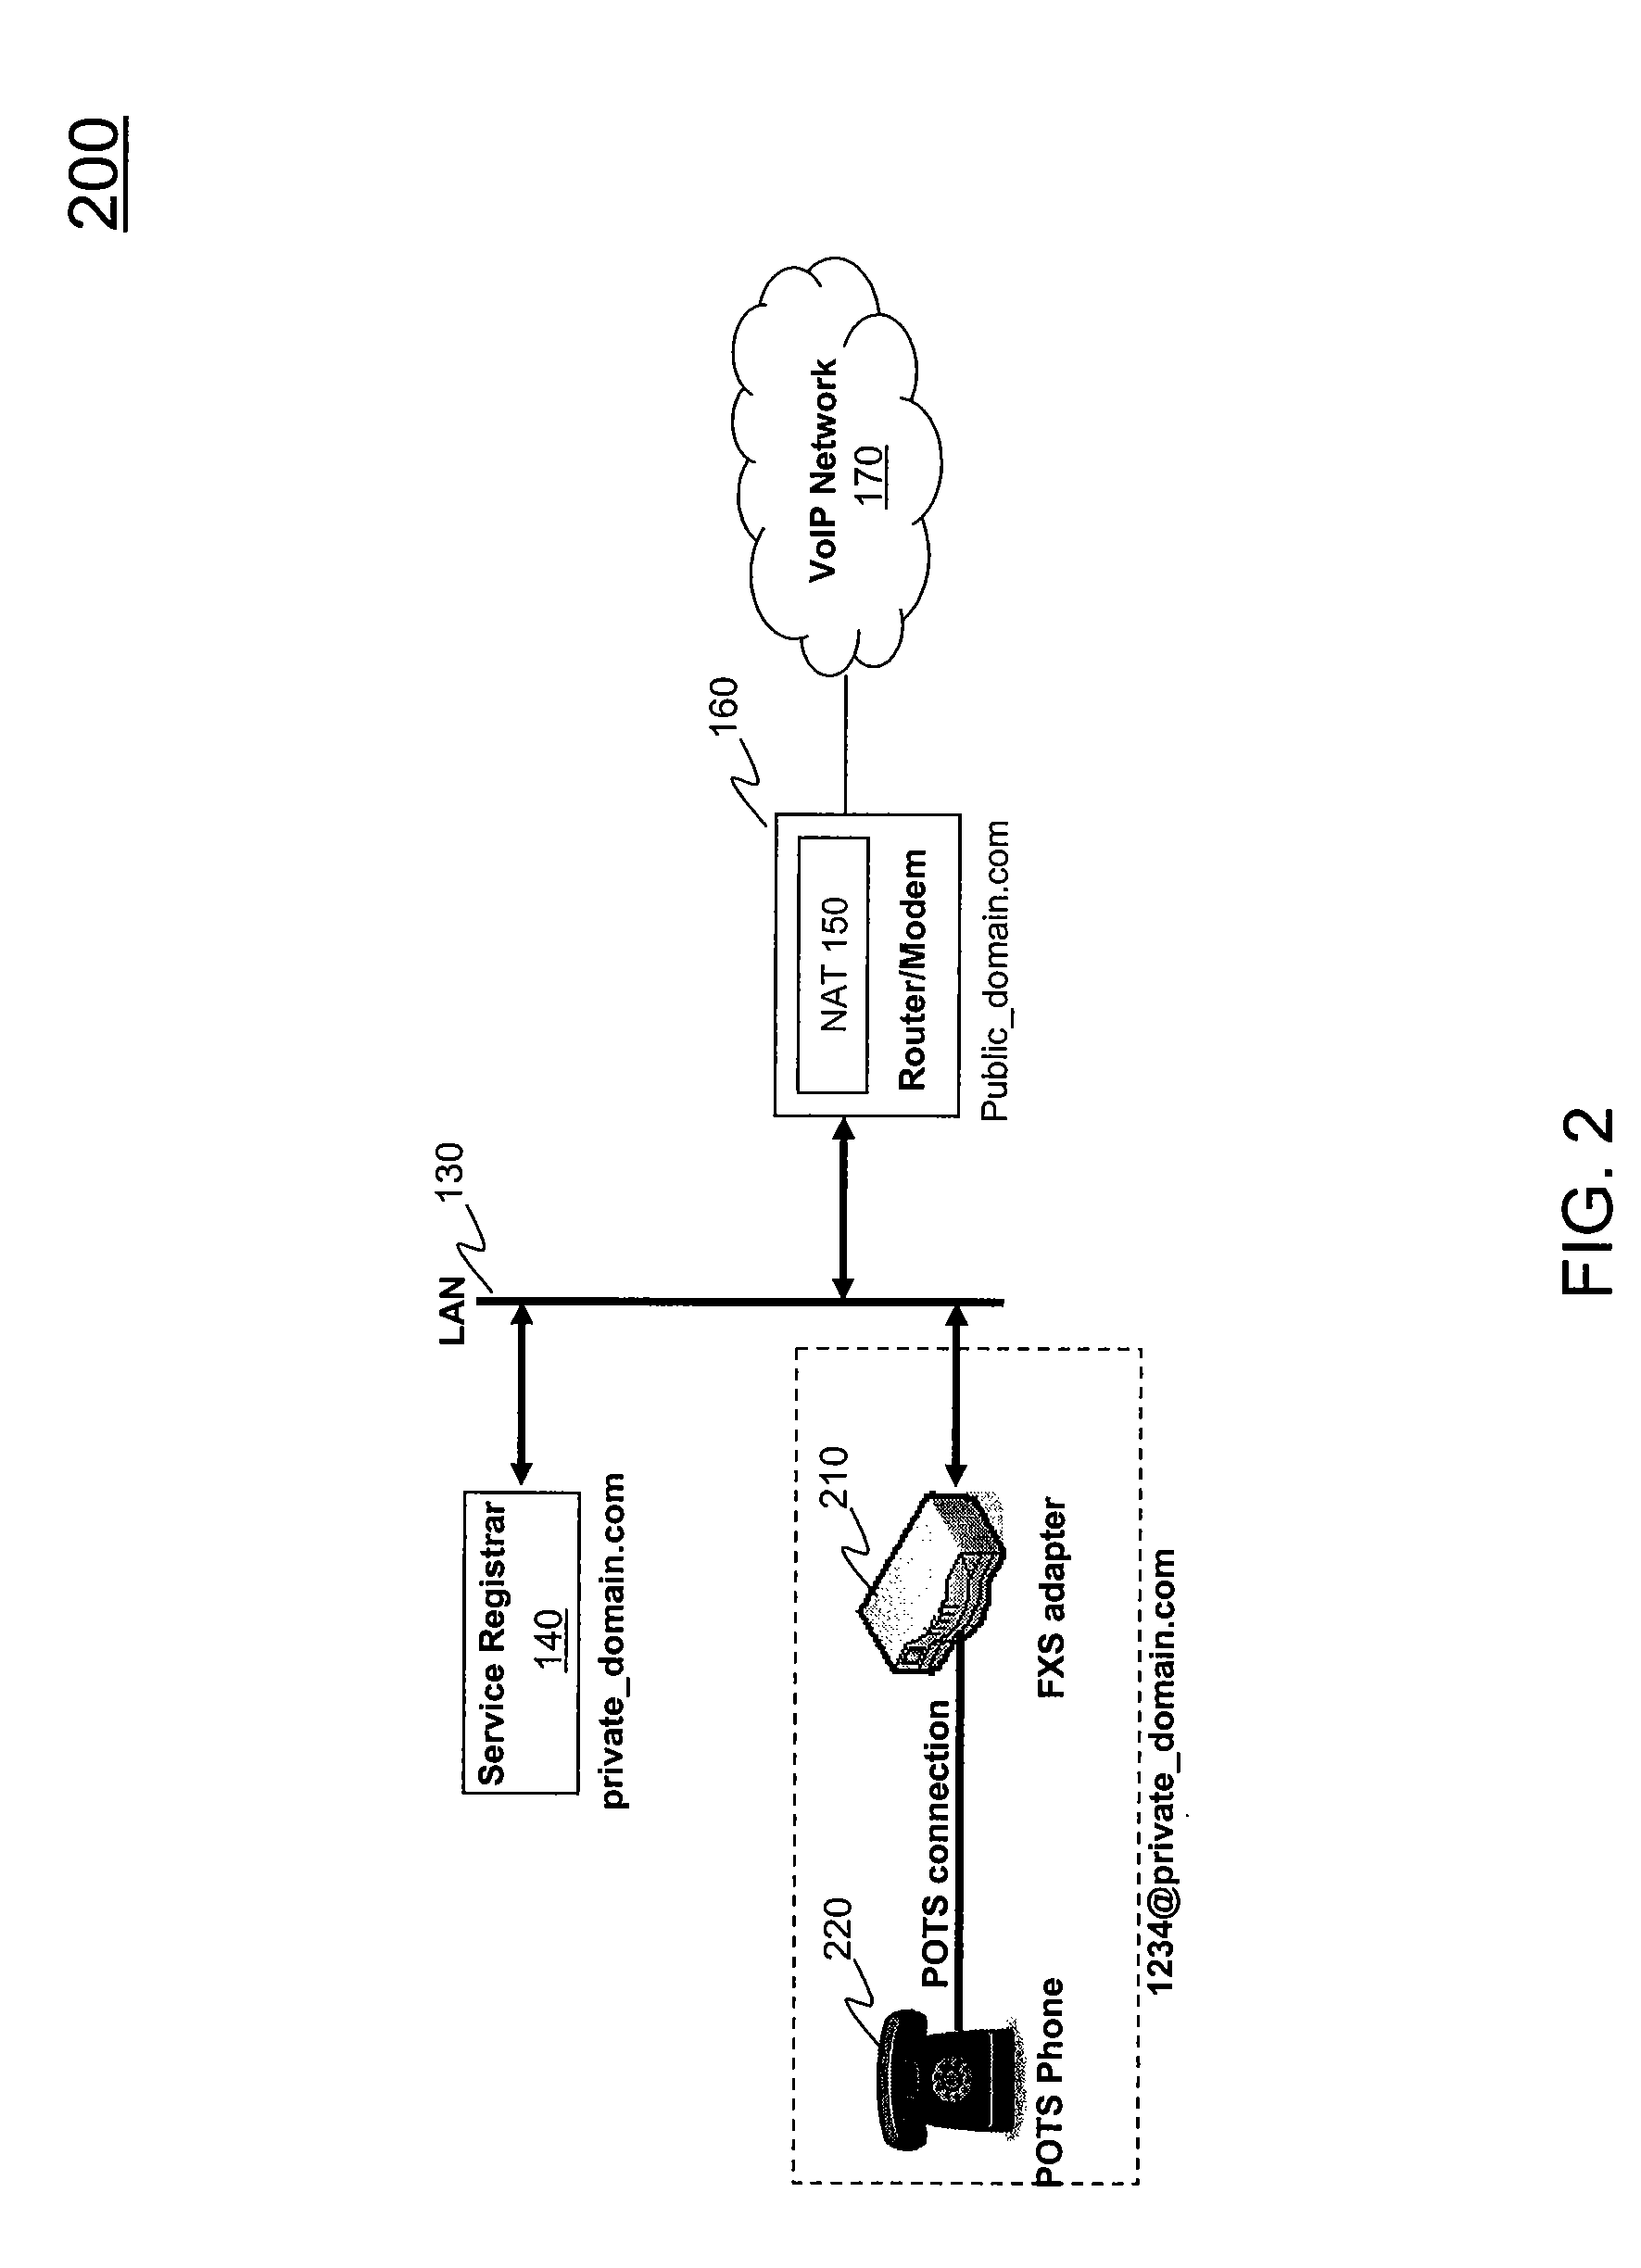 System for Supporting Analog Telephones in an IP Telephone Network